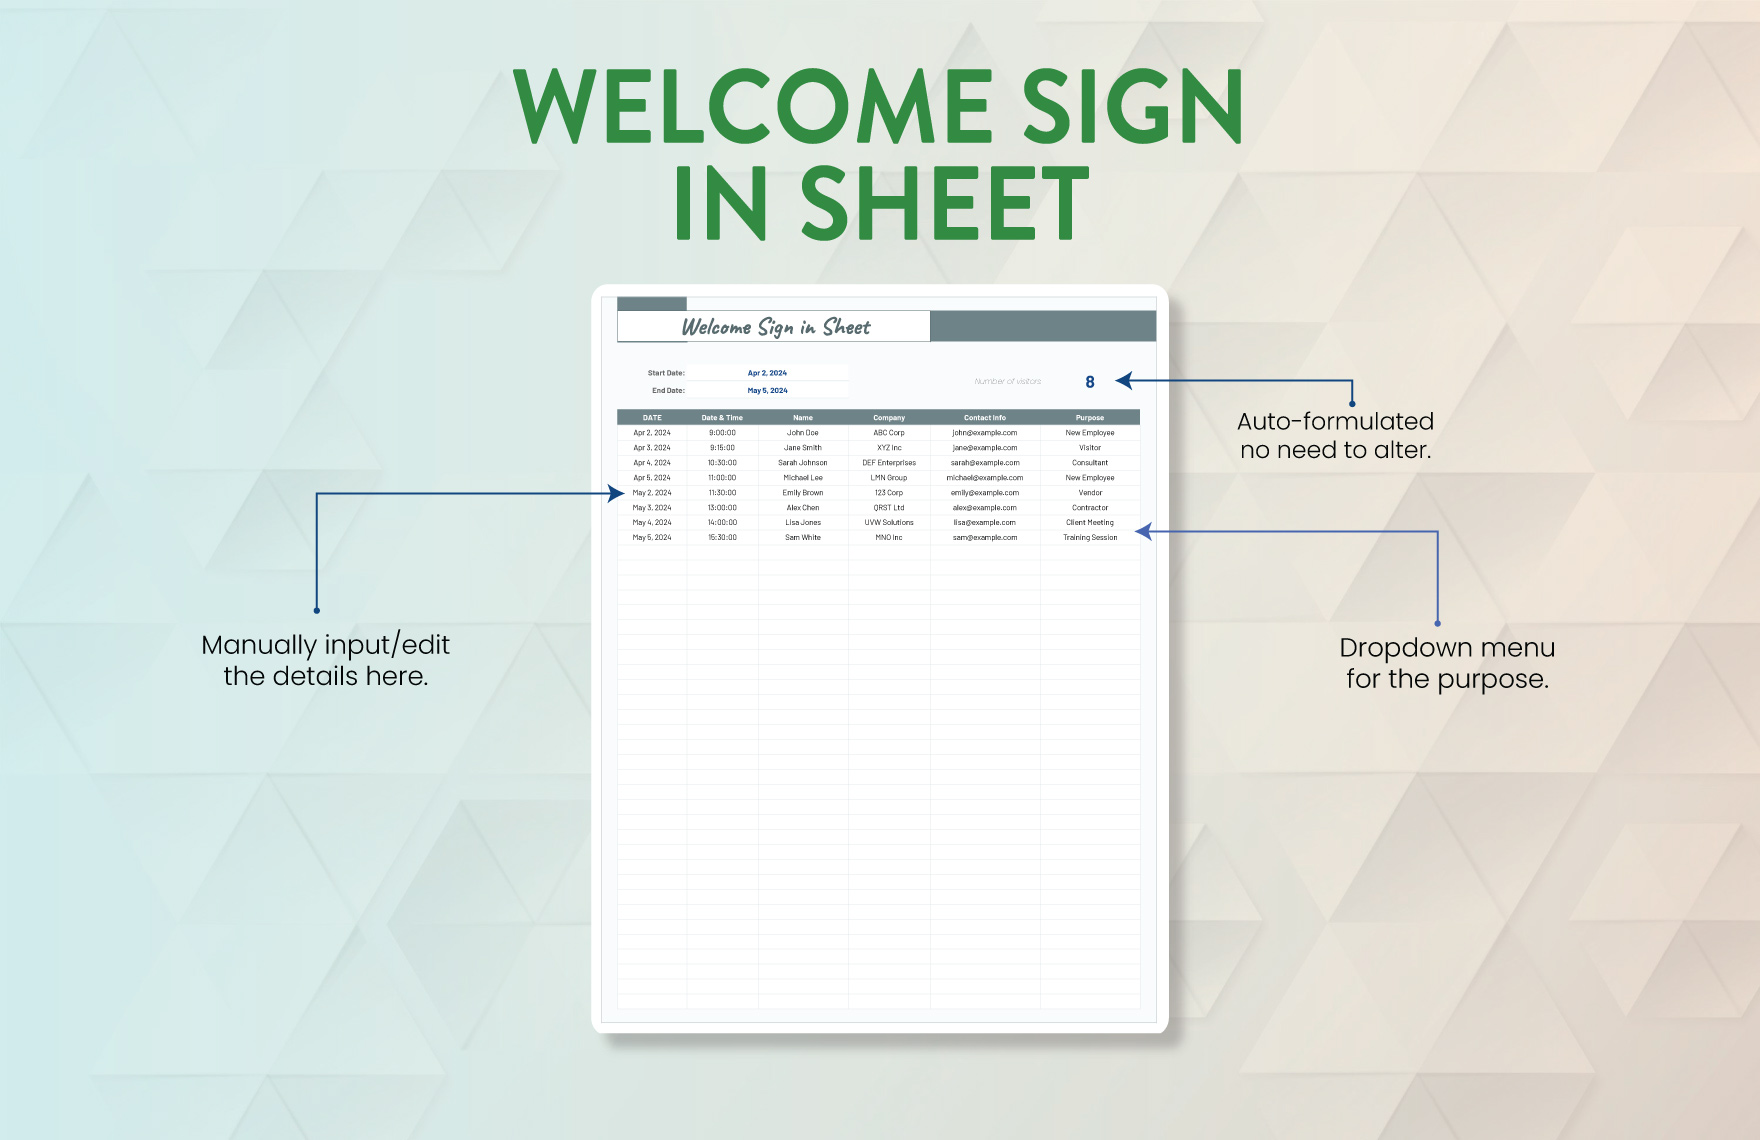 Welcome Sign in Sheet Template